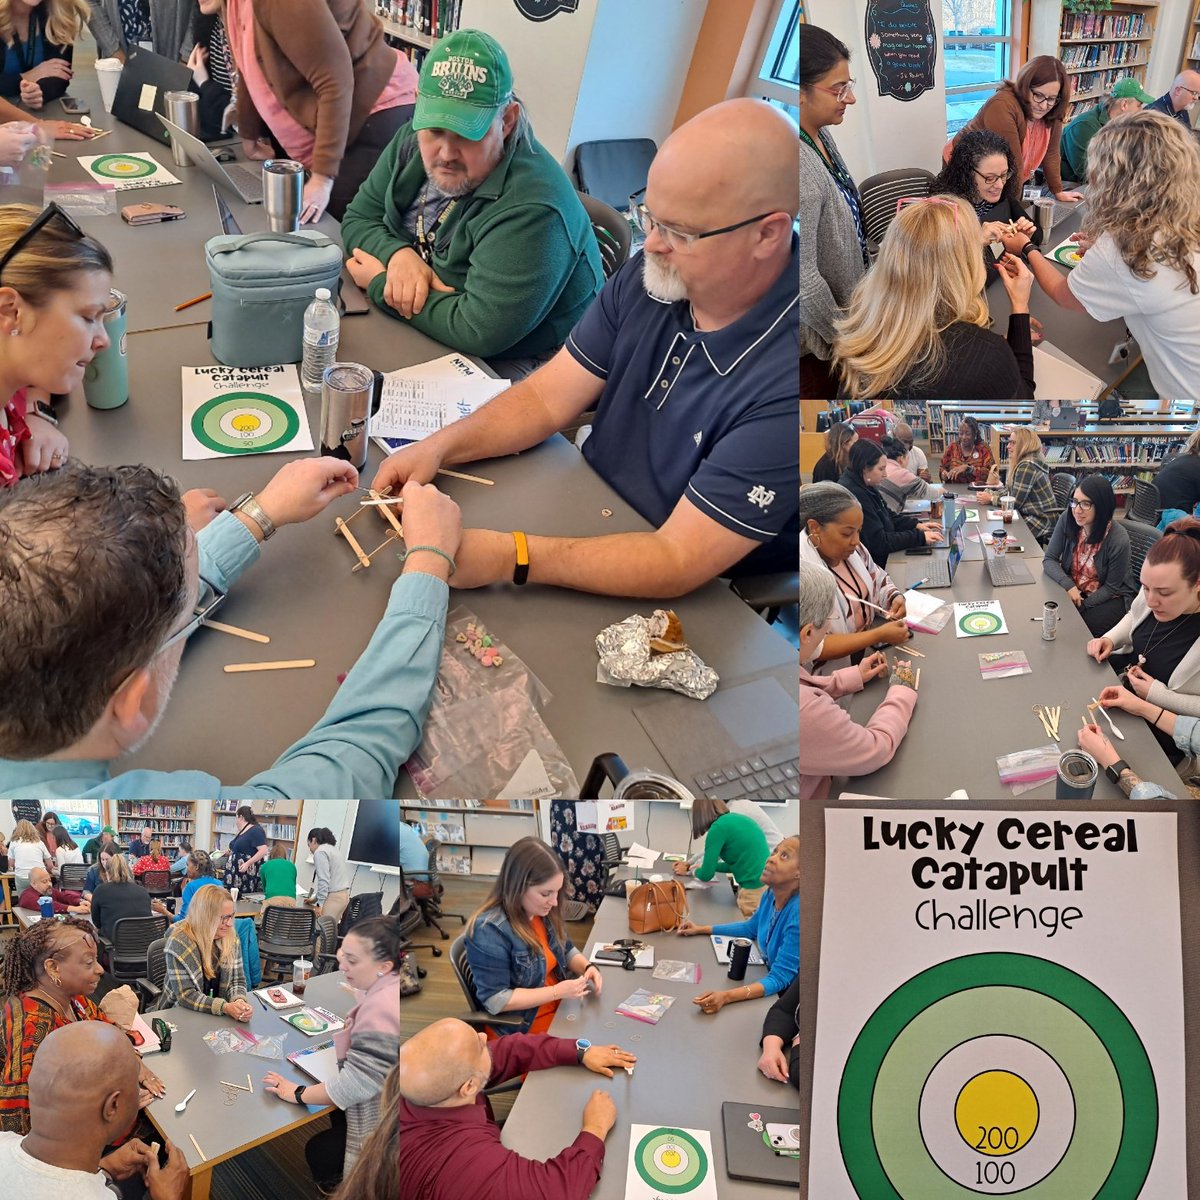 Our STEM engineers had fun engaging in their Lucky Charm Catapult Challenge as our warm-up for Literacy PL! Way to go, stemmers! 😁 @STEMEdCT @msboratko @Hartford_Public @HartfordSuper @corinne_barney Our STEM staff 'Sham-ROCKS' 🌱❤️